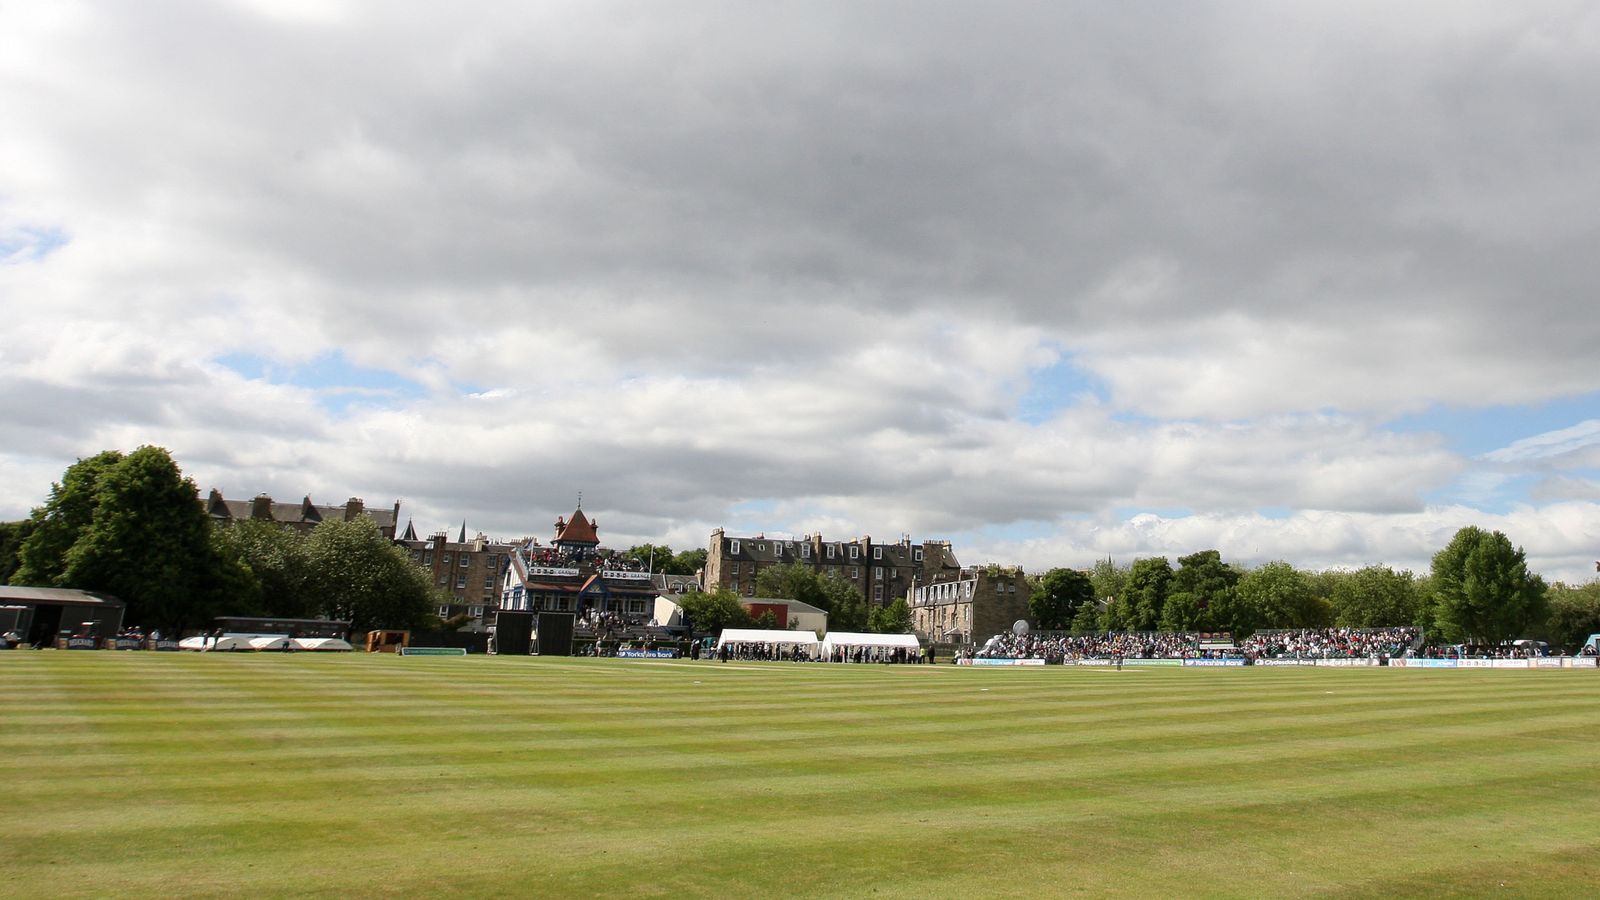 Cricket Scotland found to have engaged in ‘unacceptable’ treatment of women and girls by ‘damning’ new report